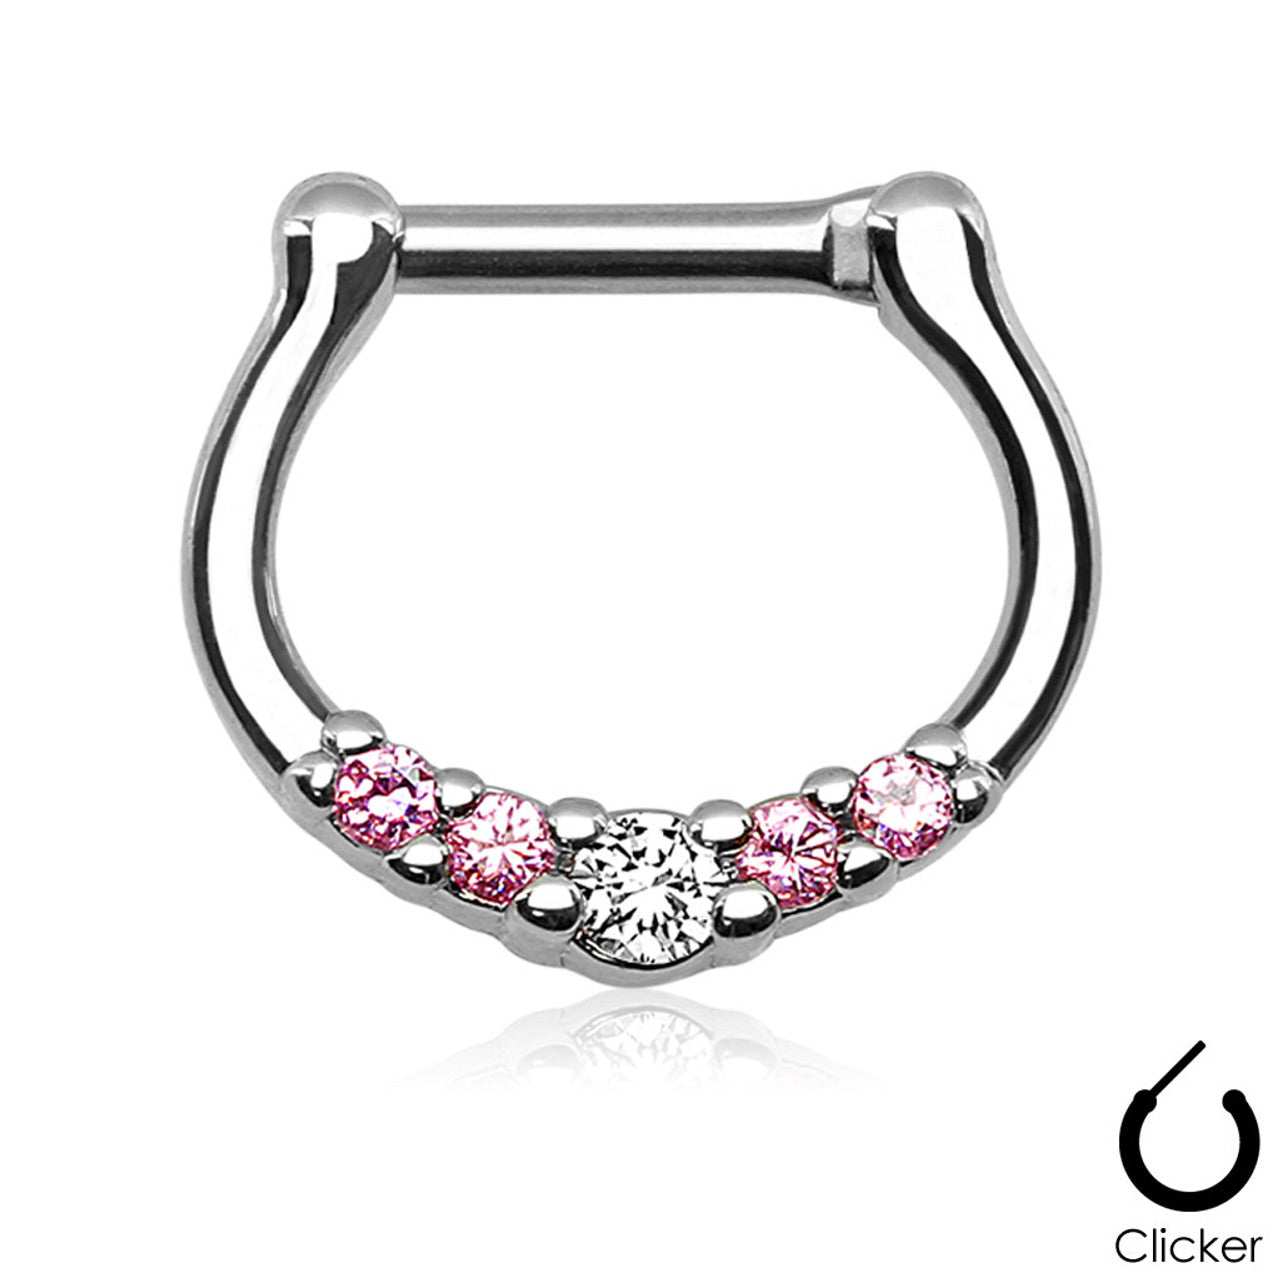 Surgical Steel Septum Clicker Ring 16 Gauge with 5 CZ Gems